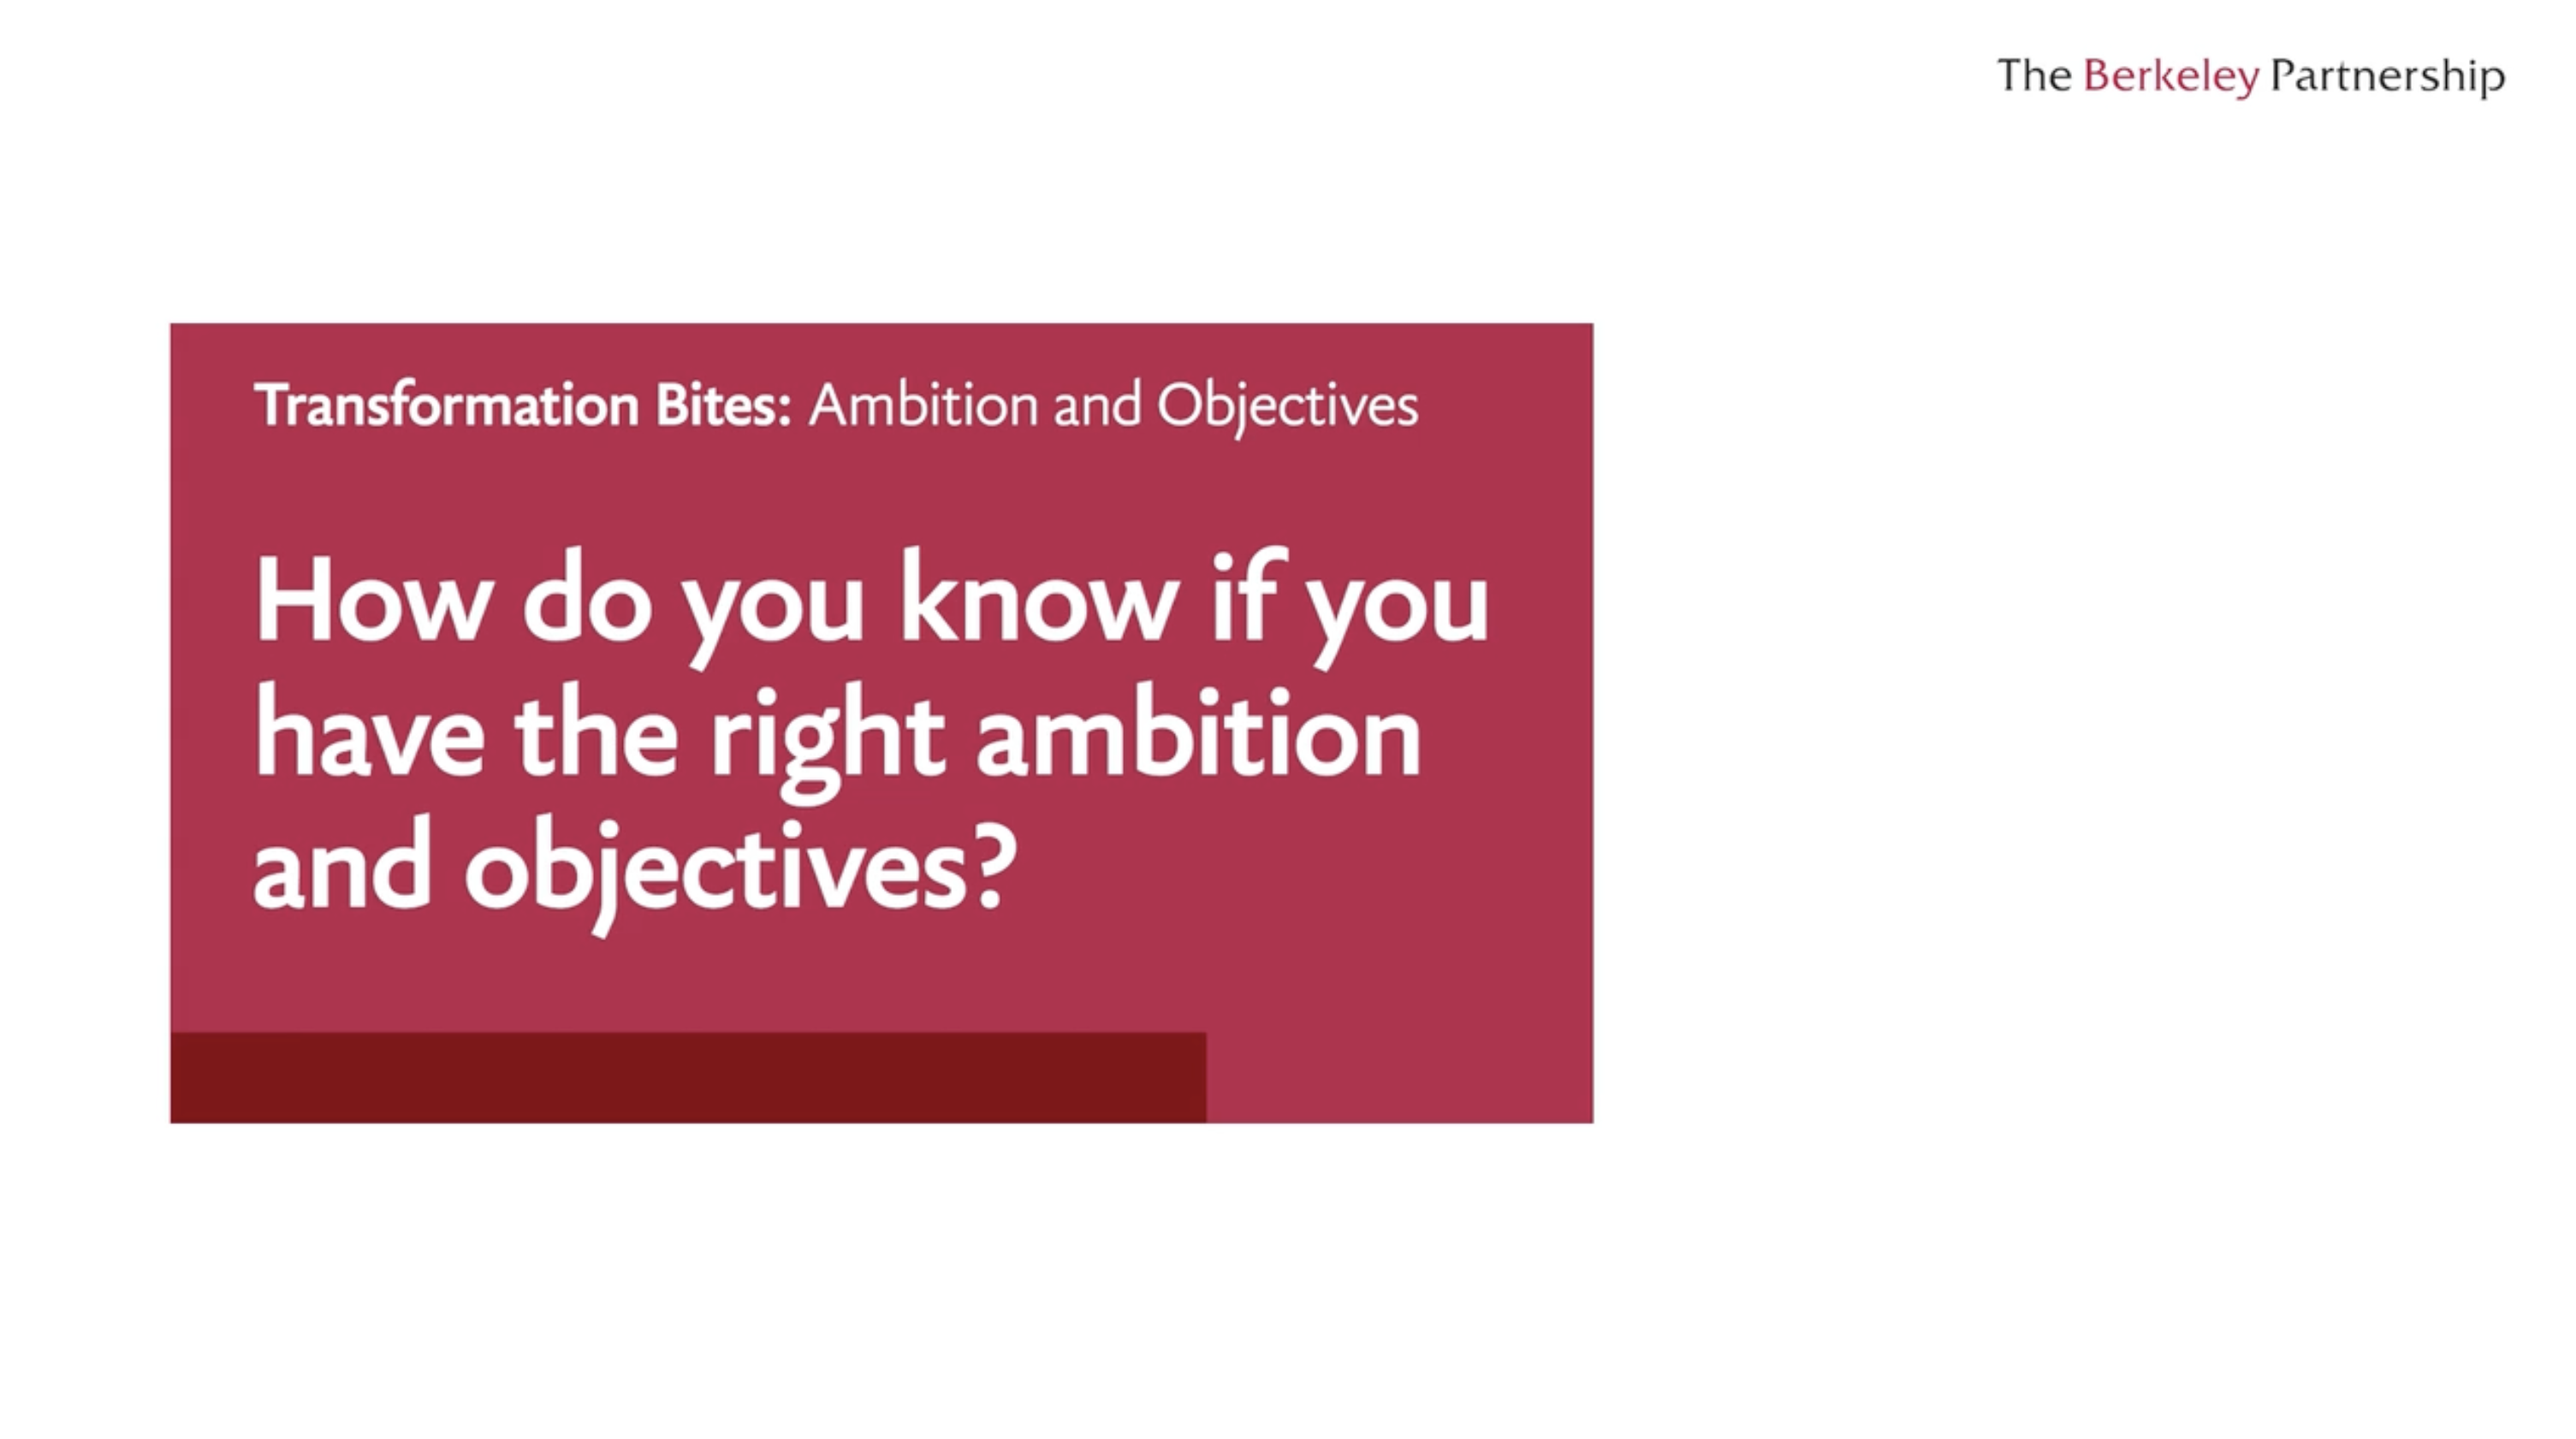 How do you know if you have the right ambition and objectives?